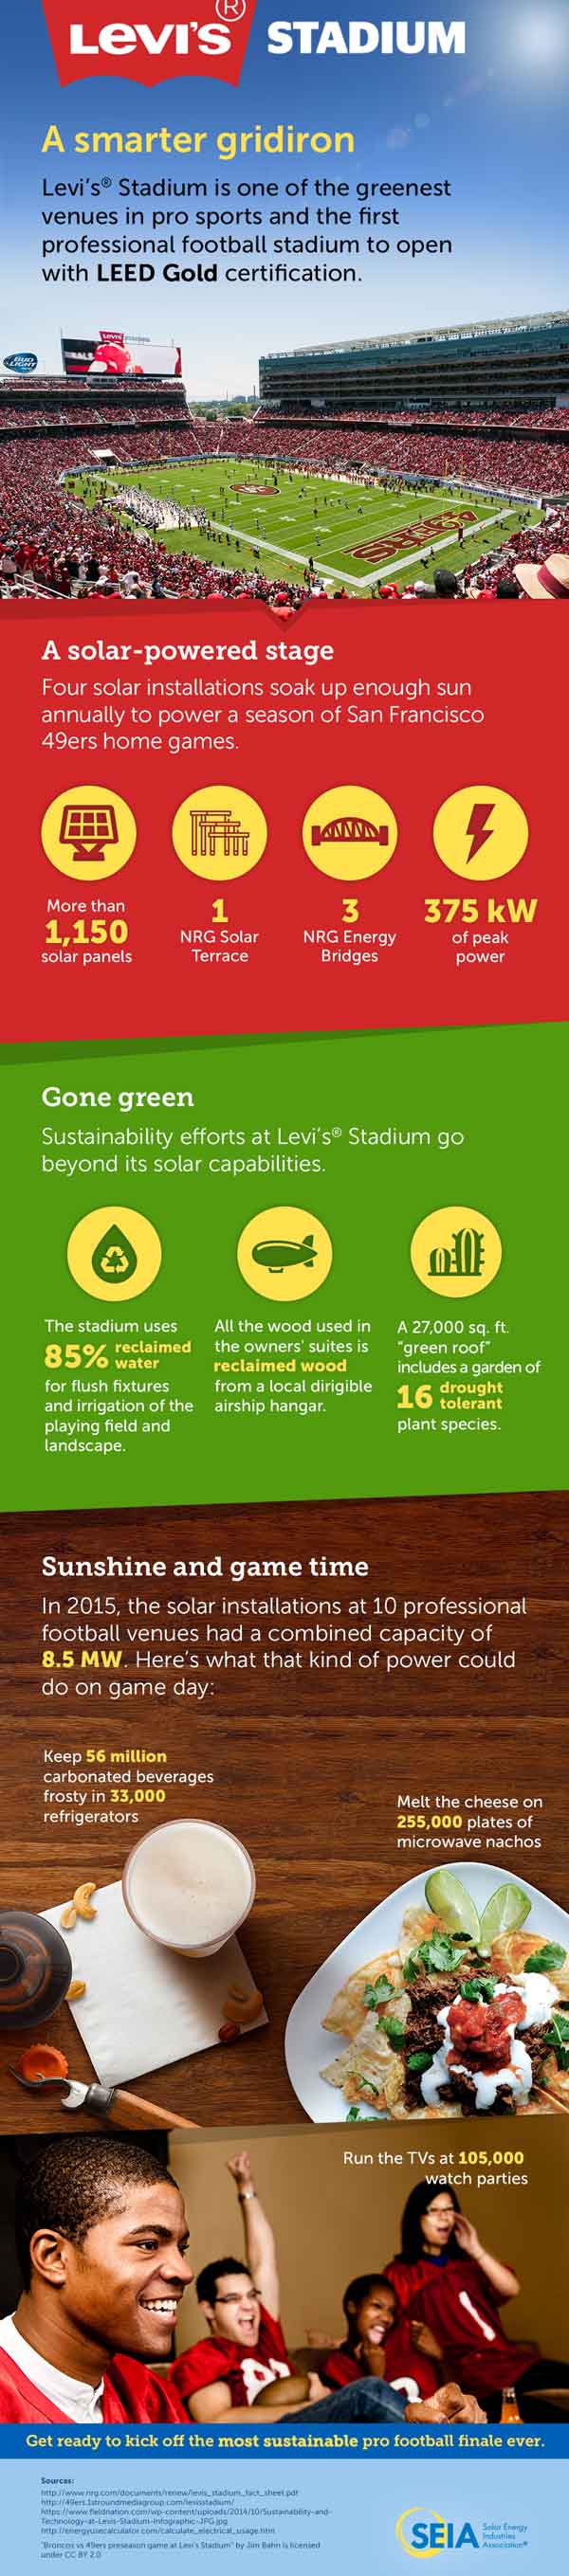 Final_Infographic-Superbowl